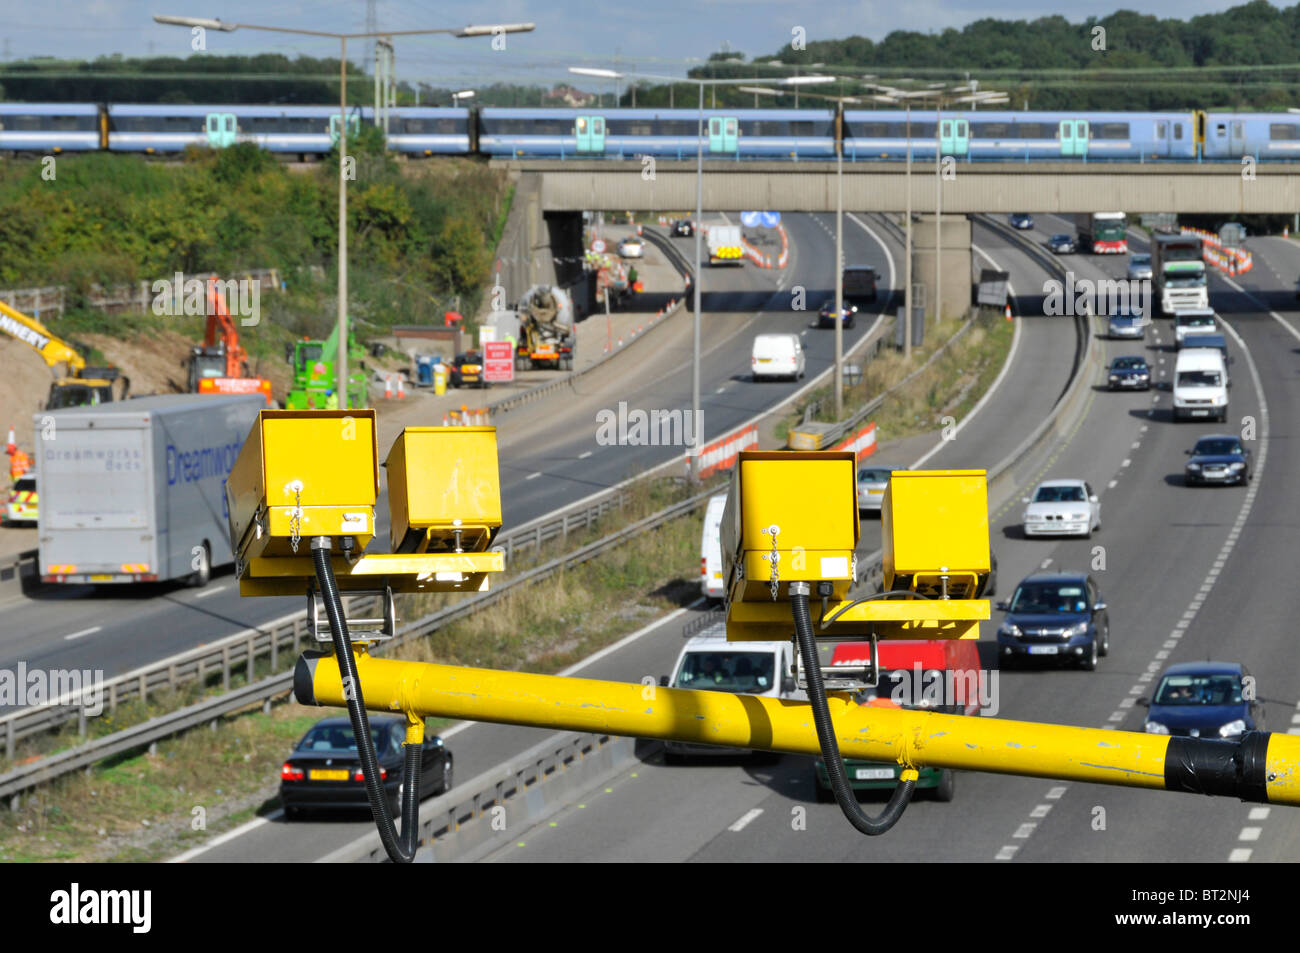 Junction 28 M25 motorway road widening site construction transport project variable speed camera train on railway bridge Brentwood Essex England UK Stock Photo